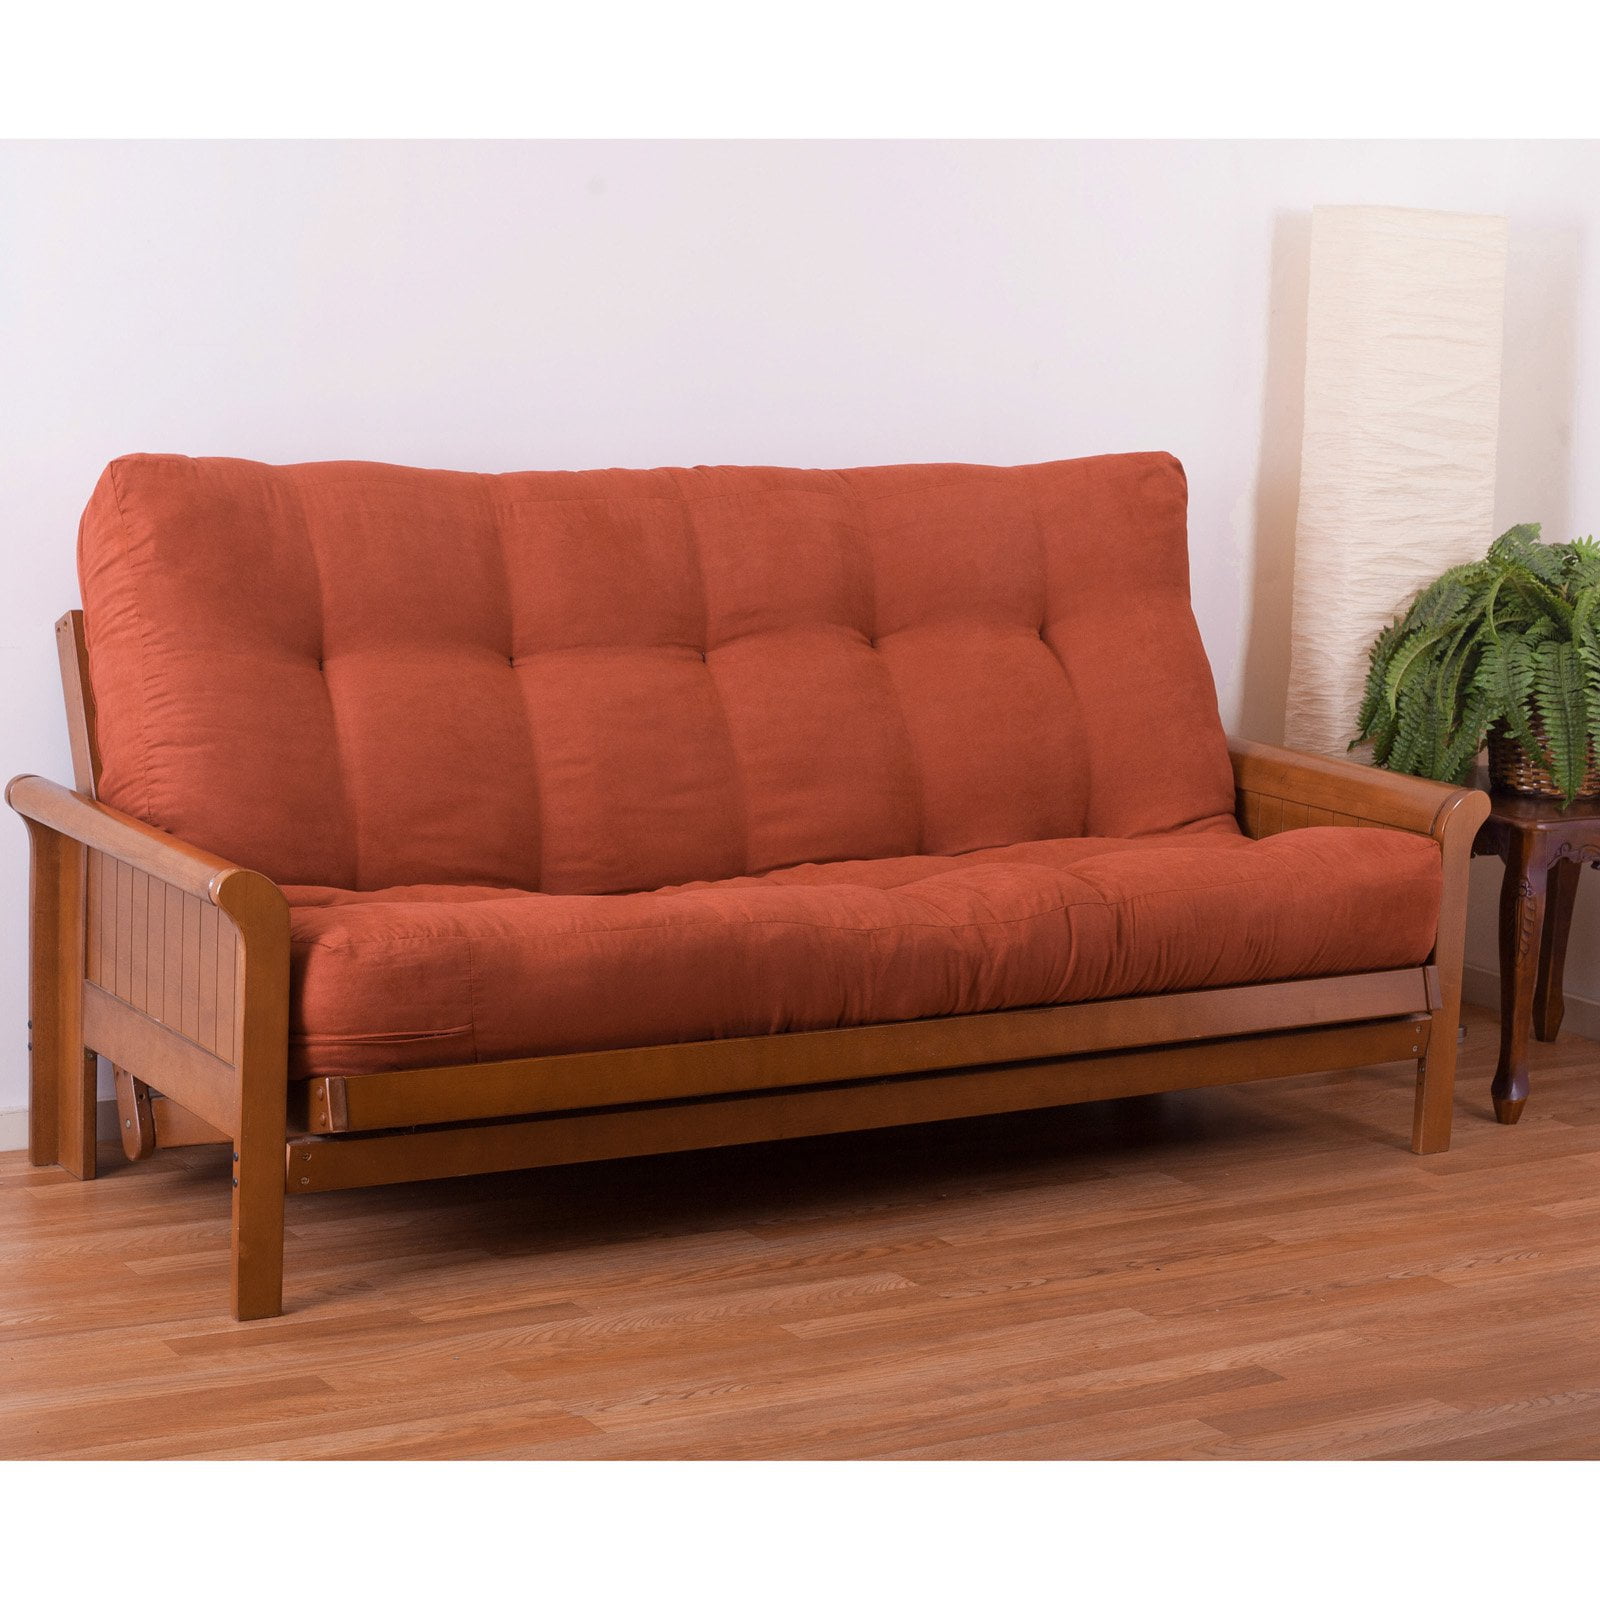 Details about   Blazing Needles Full Size 3-Piece Microsuede Futon Cover Set 